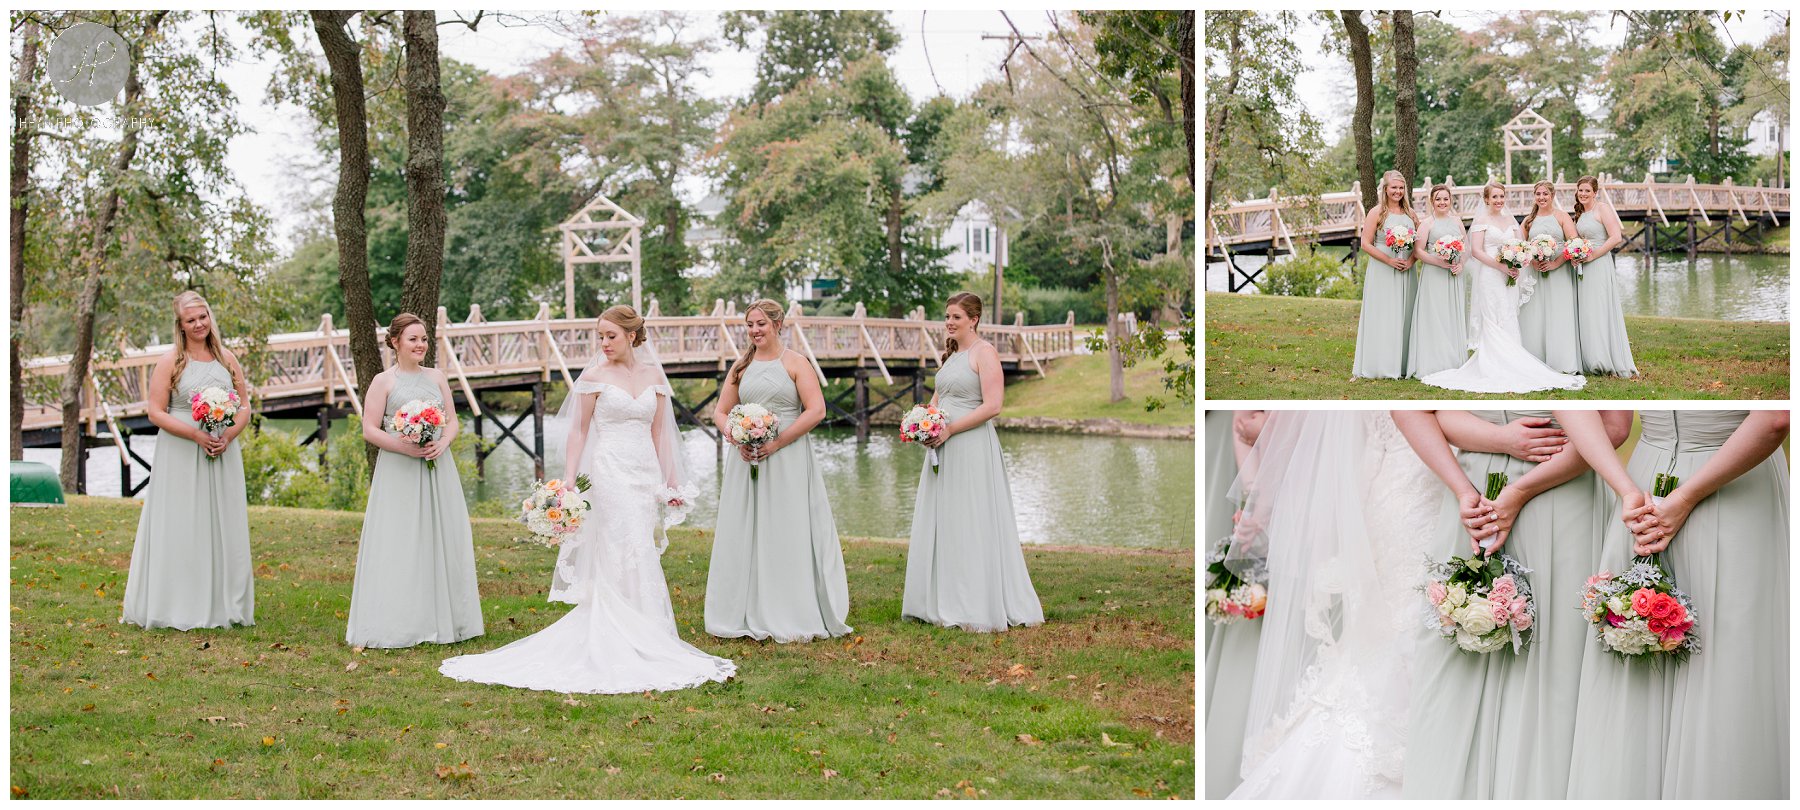 bridesmaids at spring lake park at crystal point yacht club wedding in new jersey 